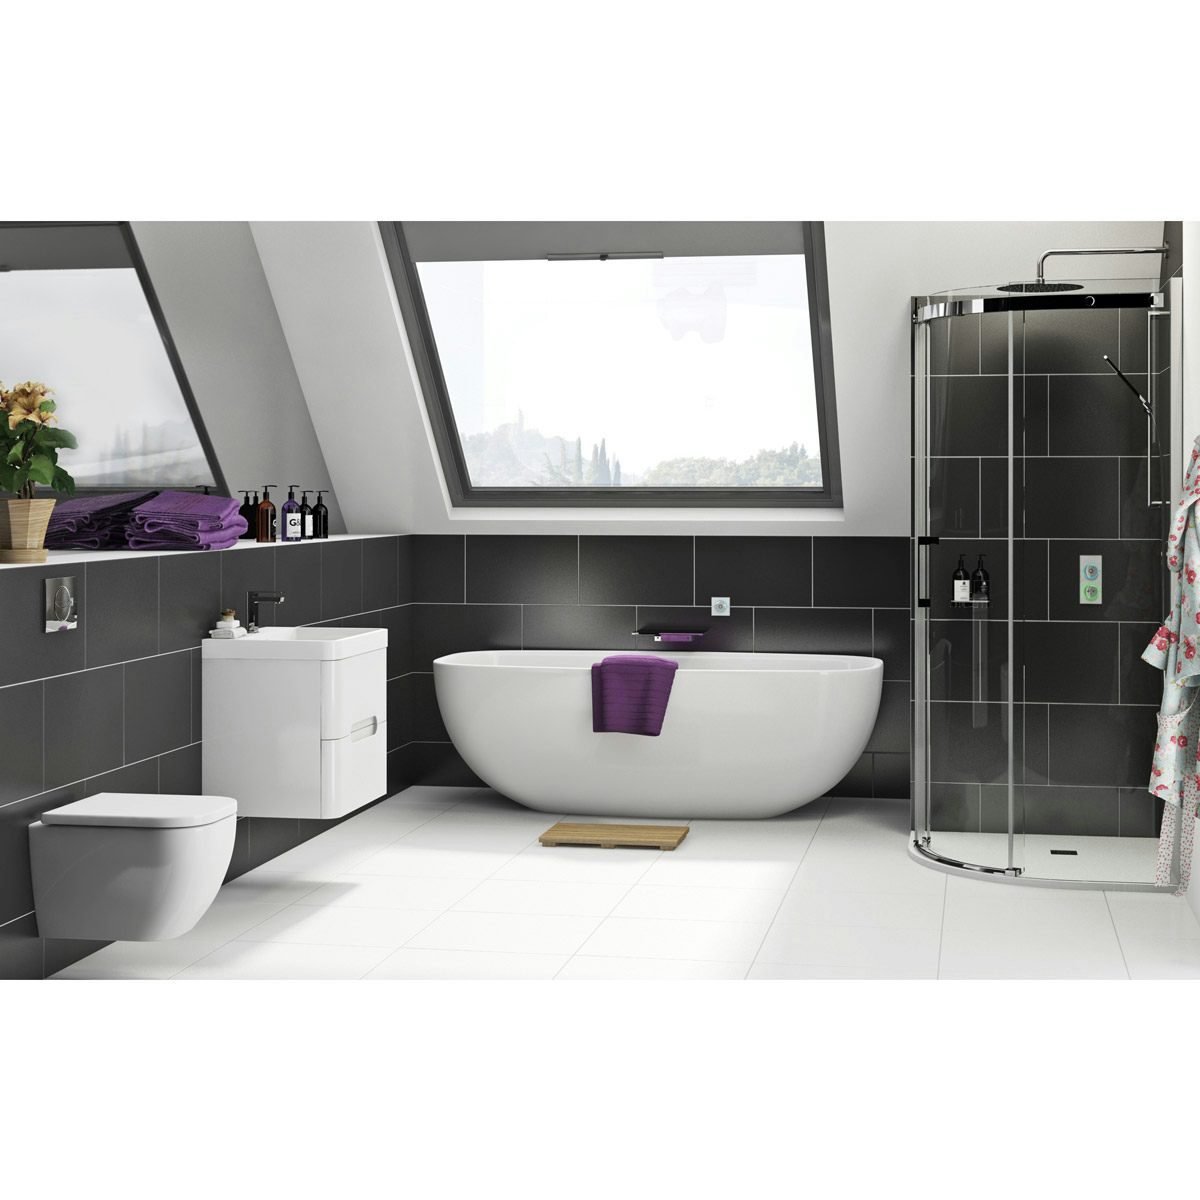 SmarTap & Mode Ellis complete suite with freestanding bath with smart showers and bath filler, enclosure, taps and wastes